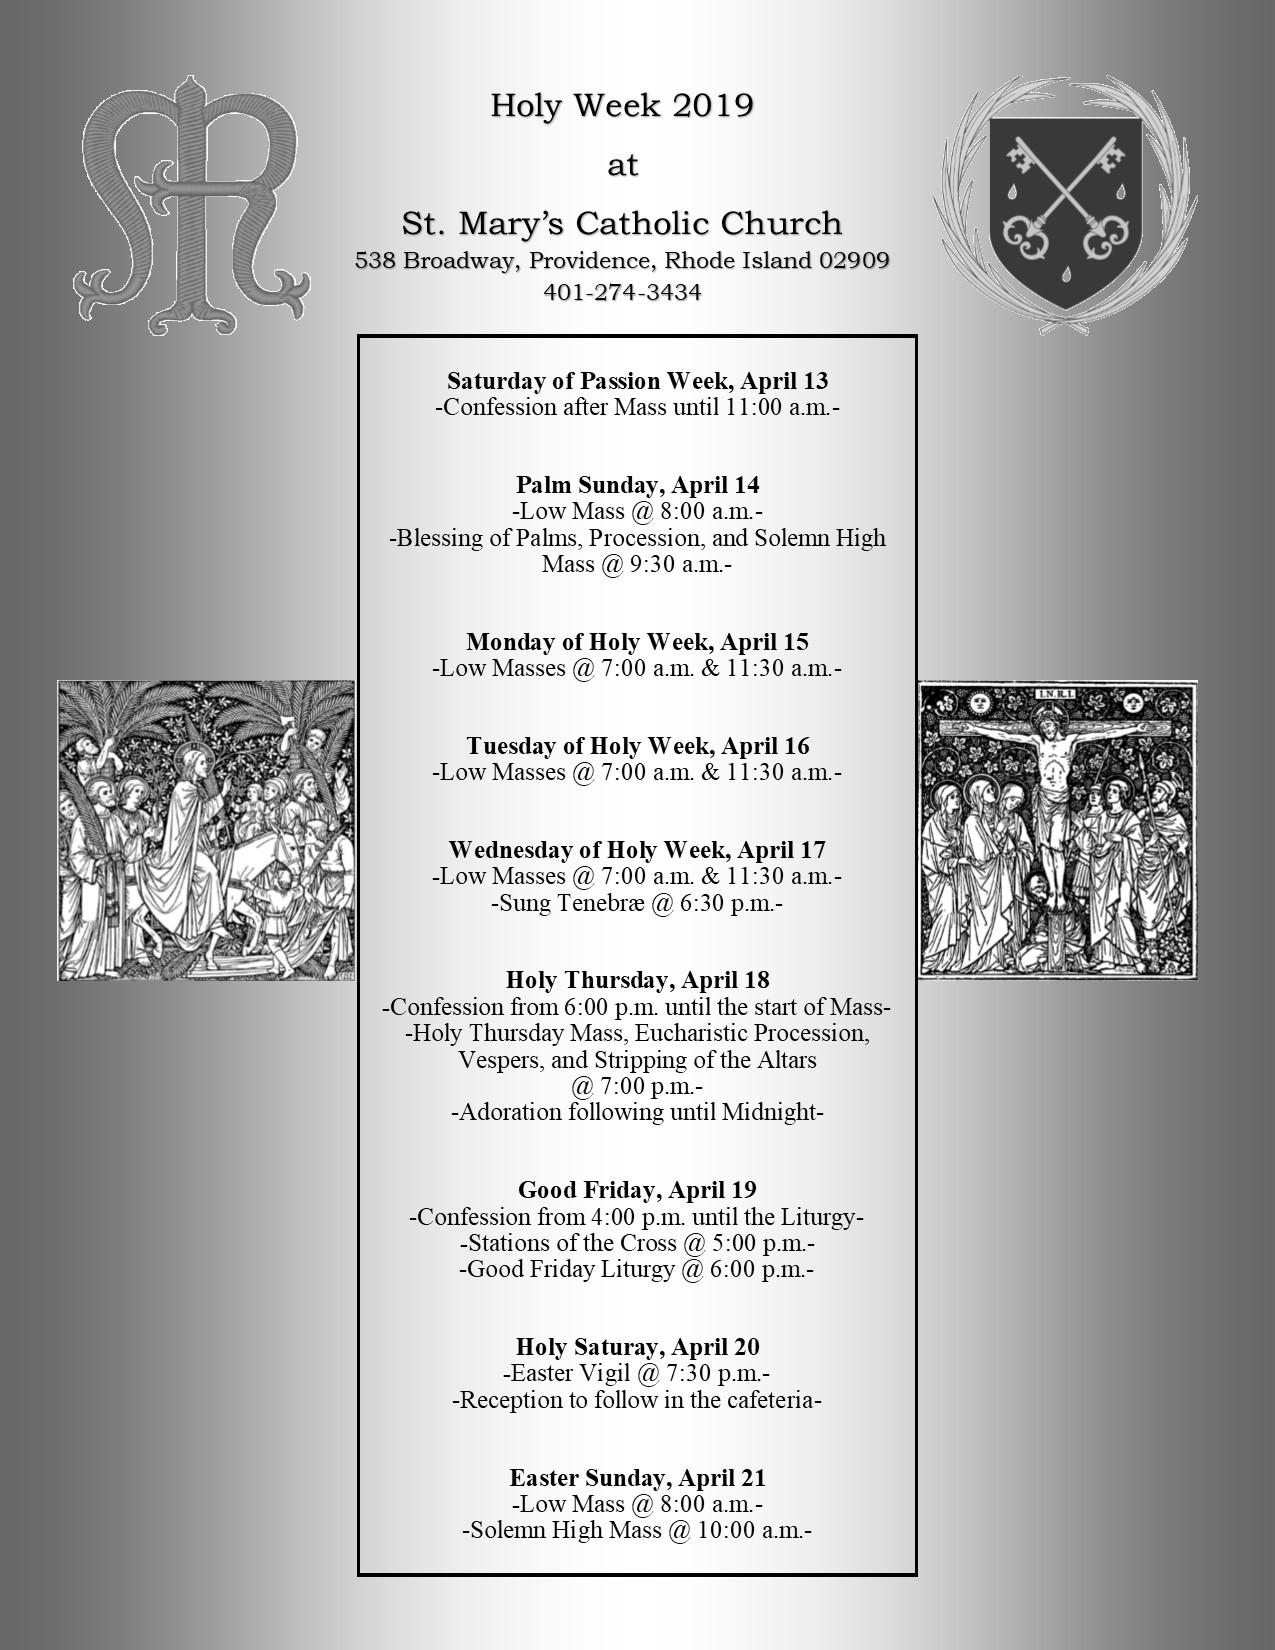 Holy Week 2019 St. Mary's on Broadway